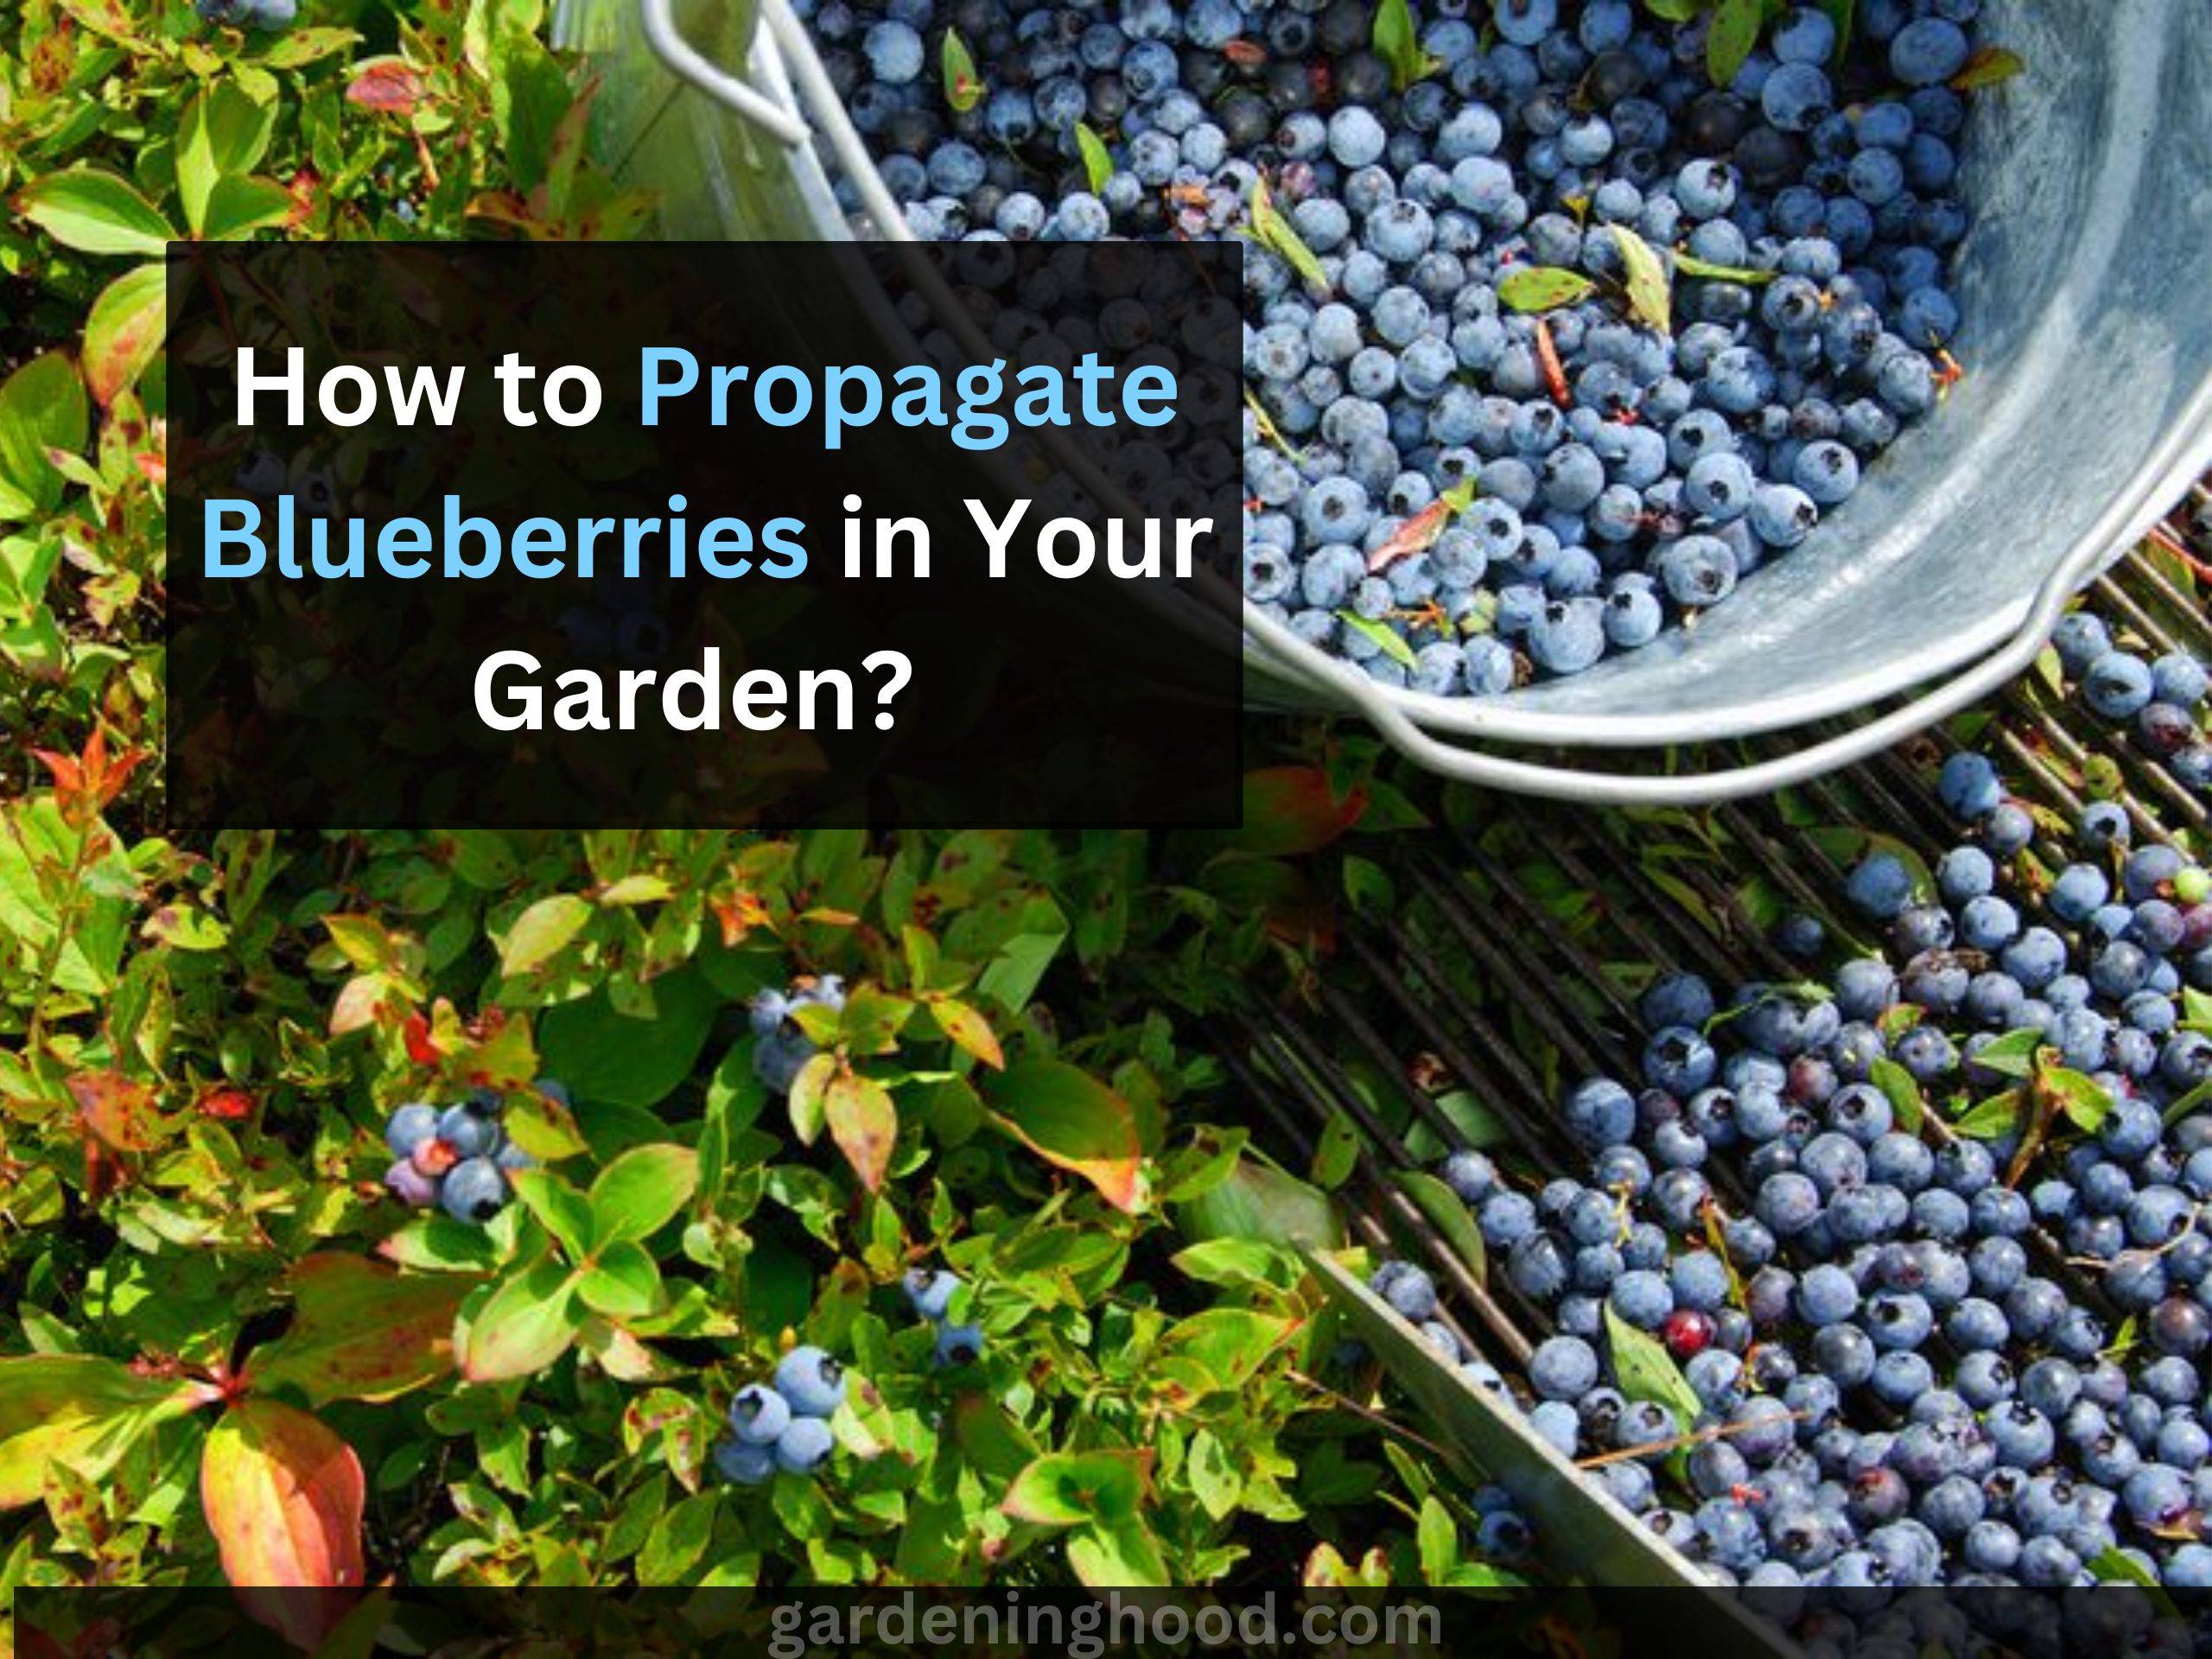 How to Propagate Blueberries in Your Garden (Growing Tips)